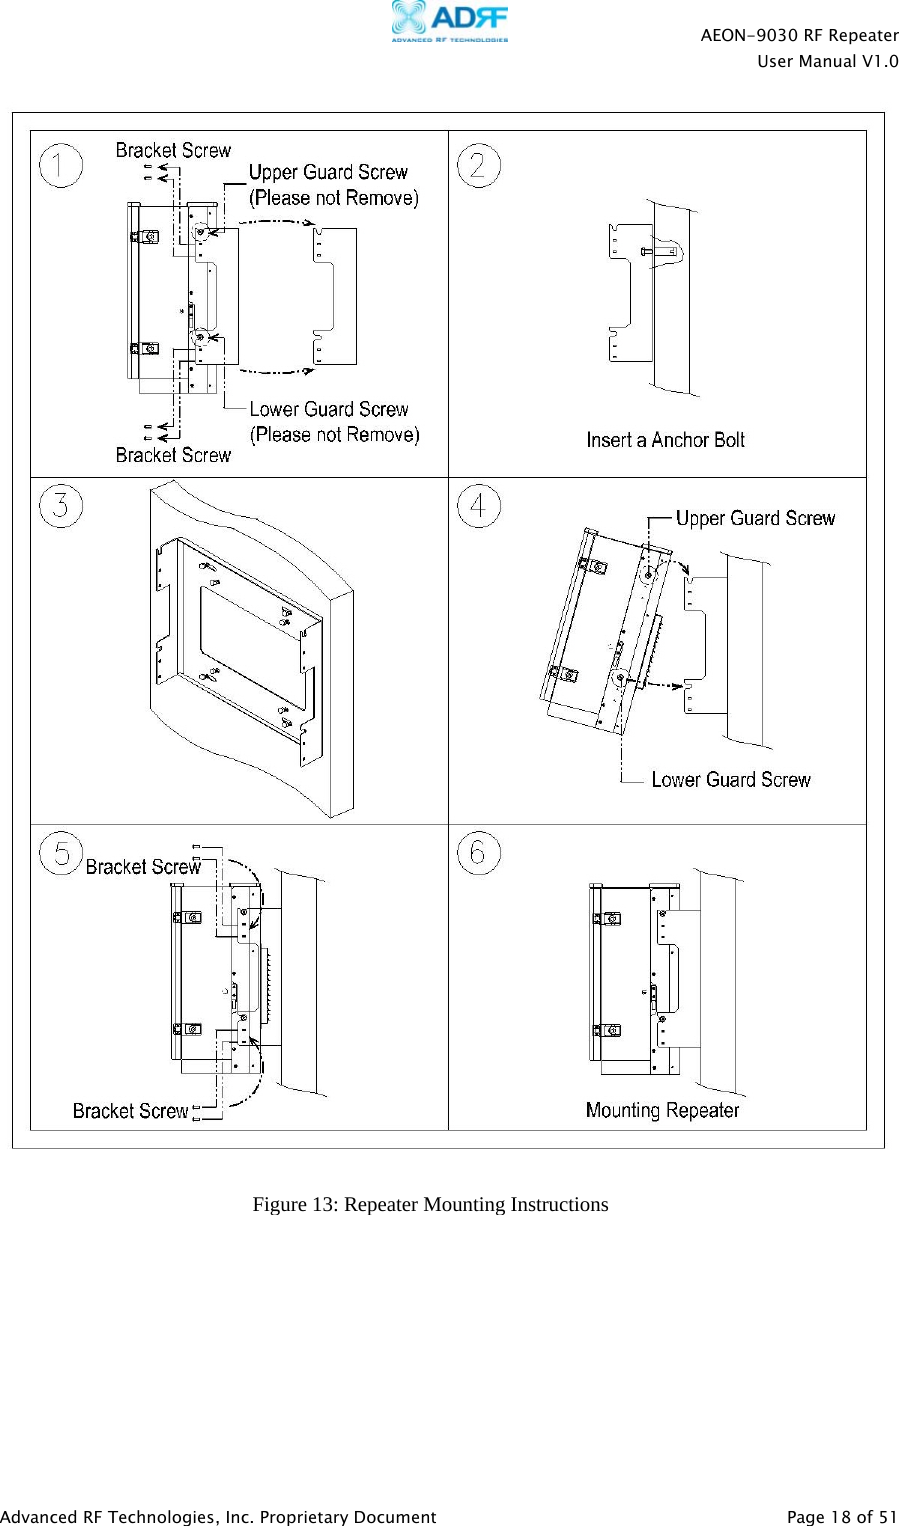    AEON-9030 RF Repeater  User Manual V1.0  Advanced RF Technologies, Inc. Proprietary Document   Page 18 of 51    Figure 13: Repeater Mounting Instructions